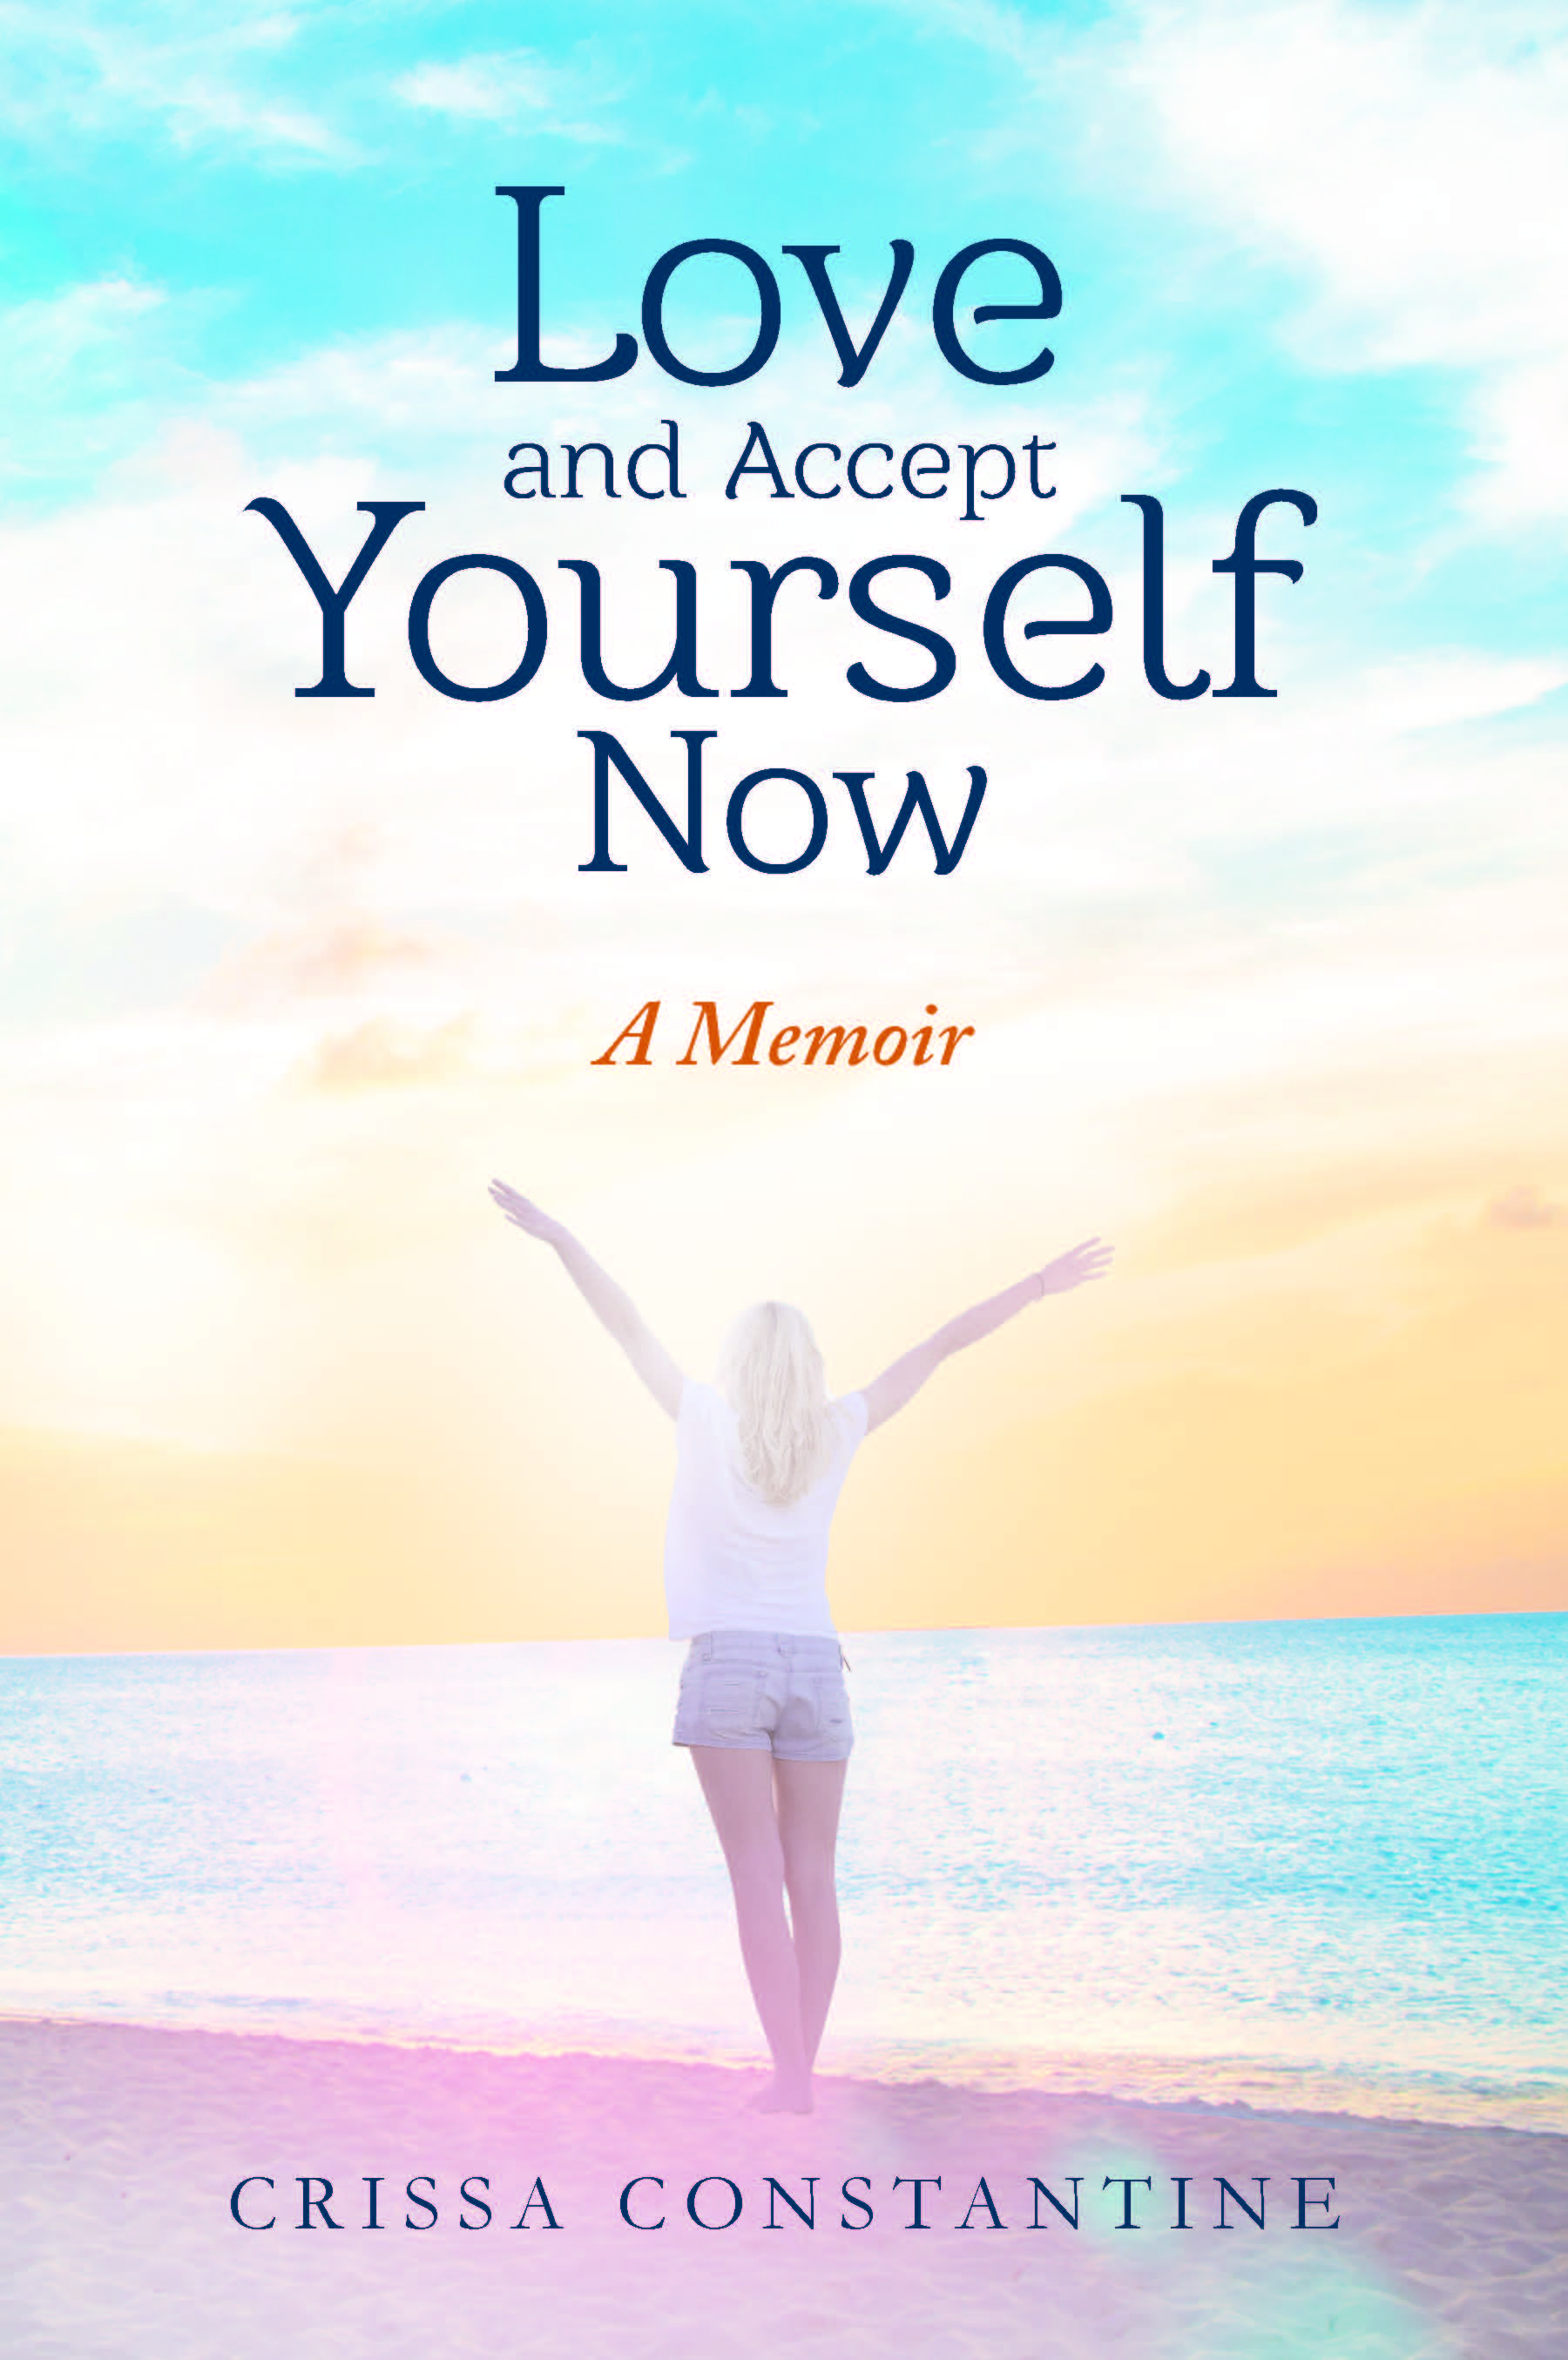 “Love and Accept Yourself Now” by Crissa Constantine (book cover)